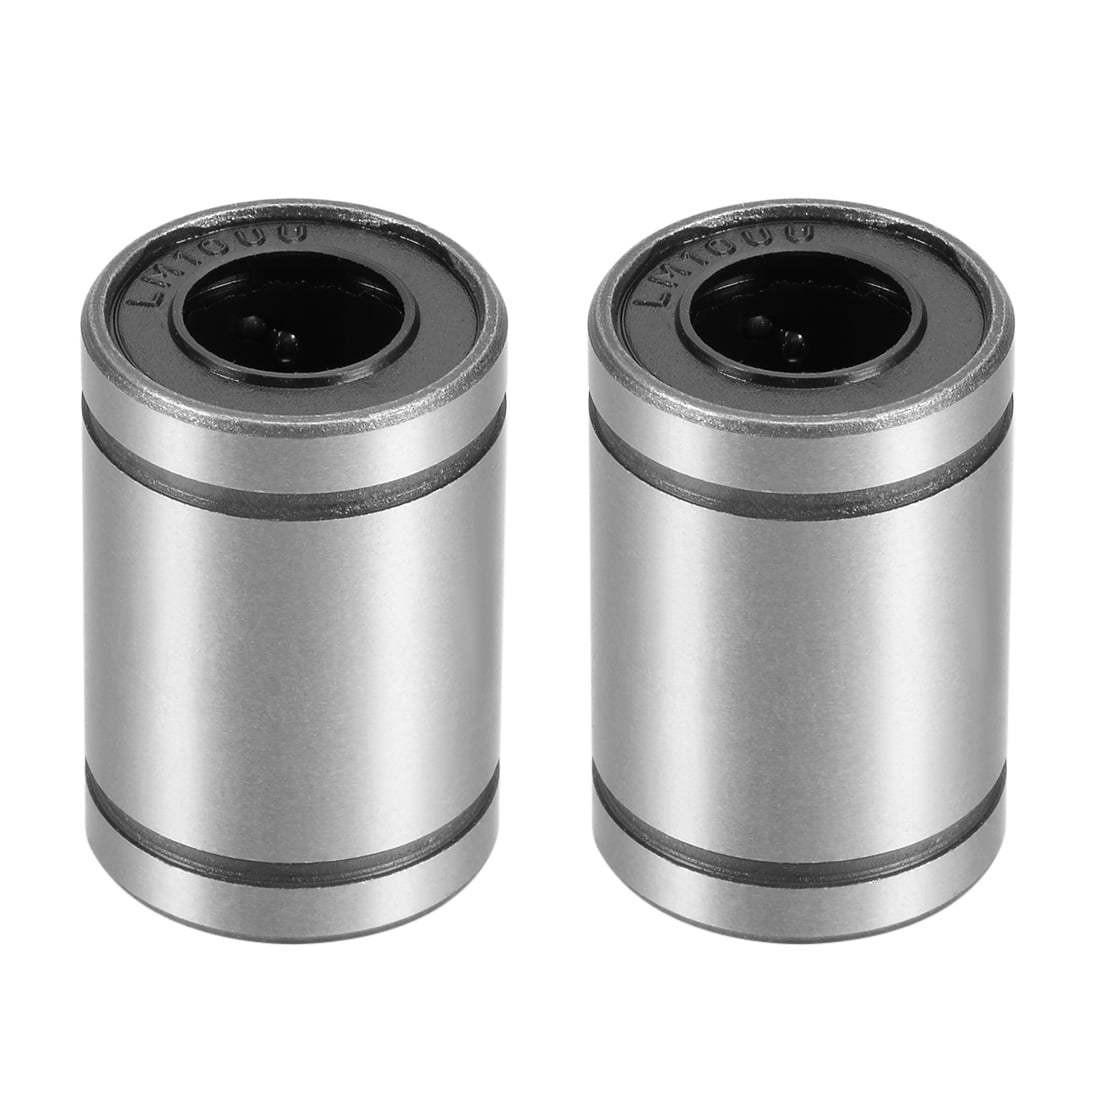 19mm OD 29mm Length Pack of 2 10mm Bore Dia uxcell LM10UU Round Flange Linear Ball Bearings 